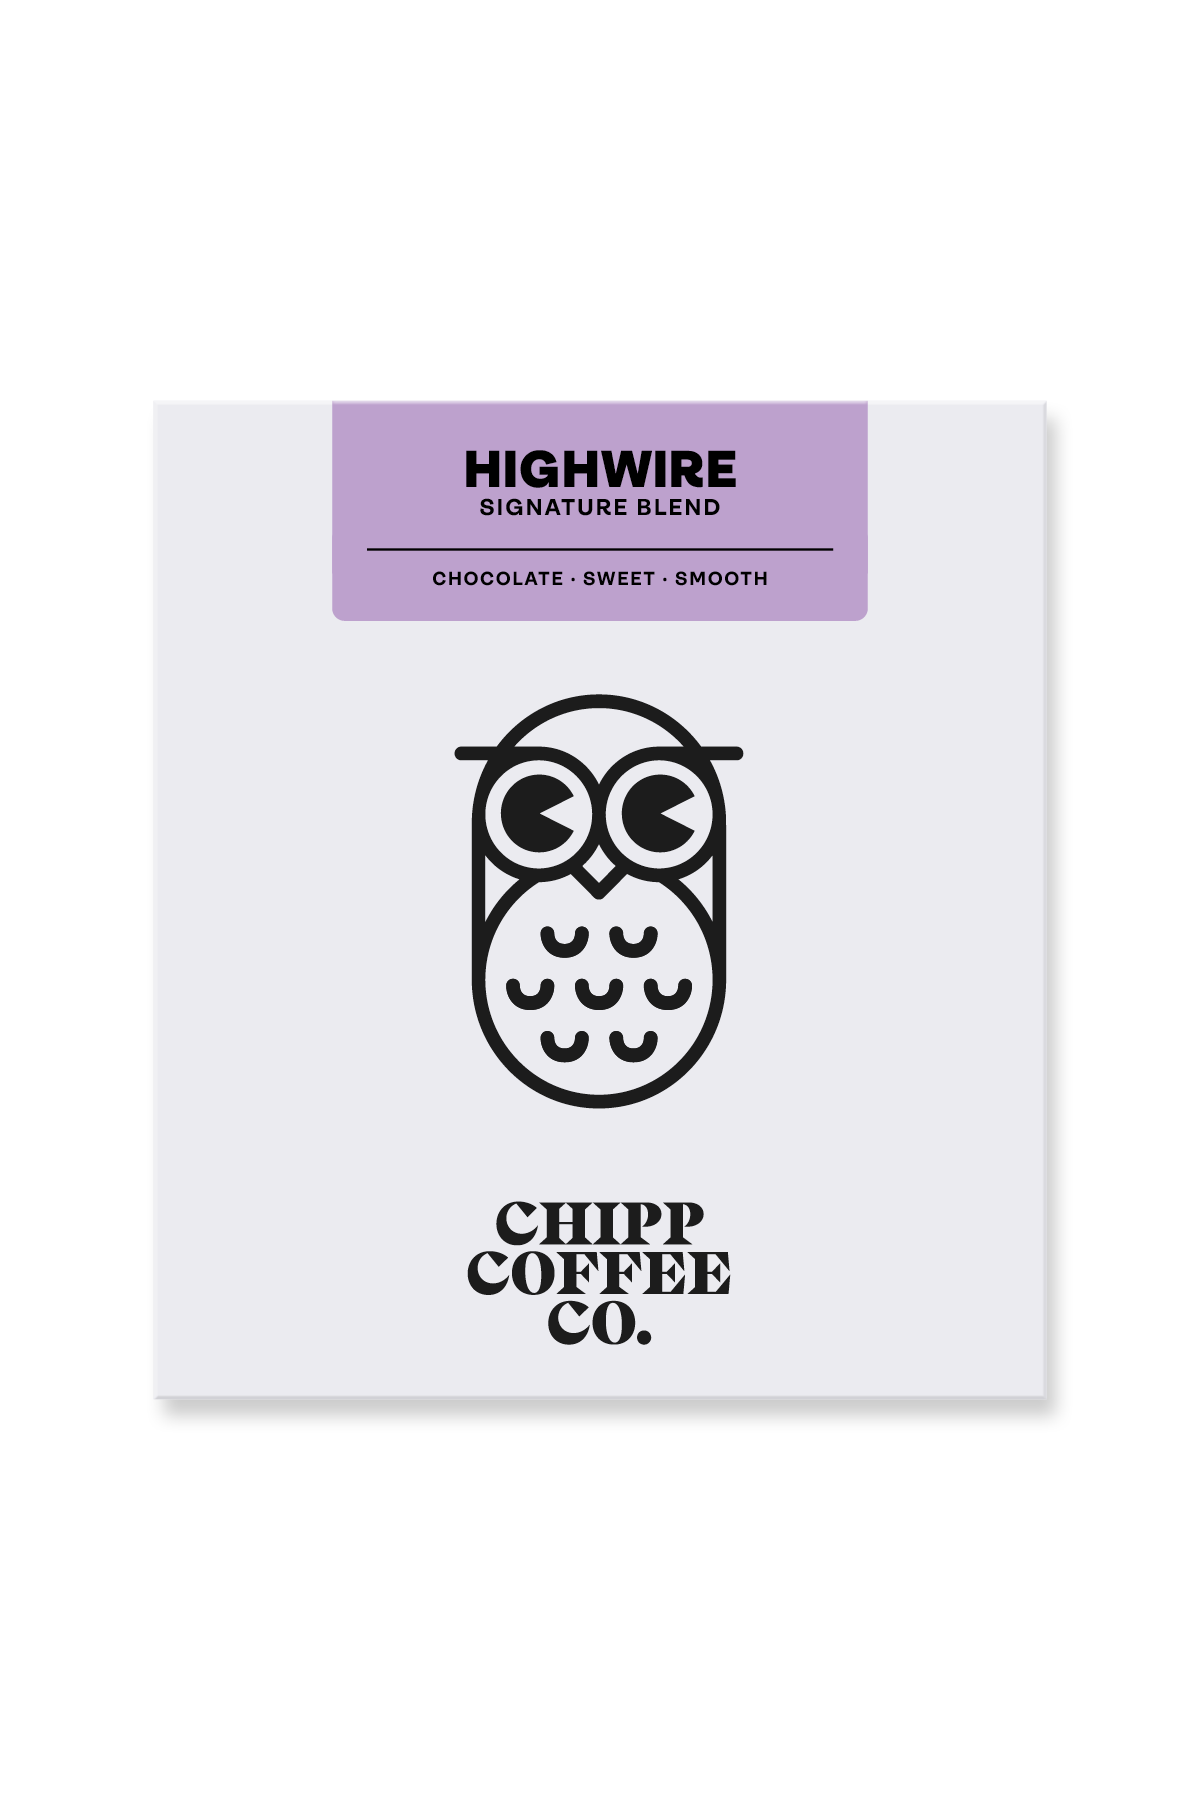 Highwire - Our best coffee blend - Chipp Coffee Co